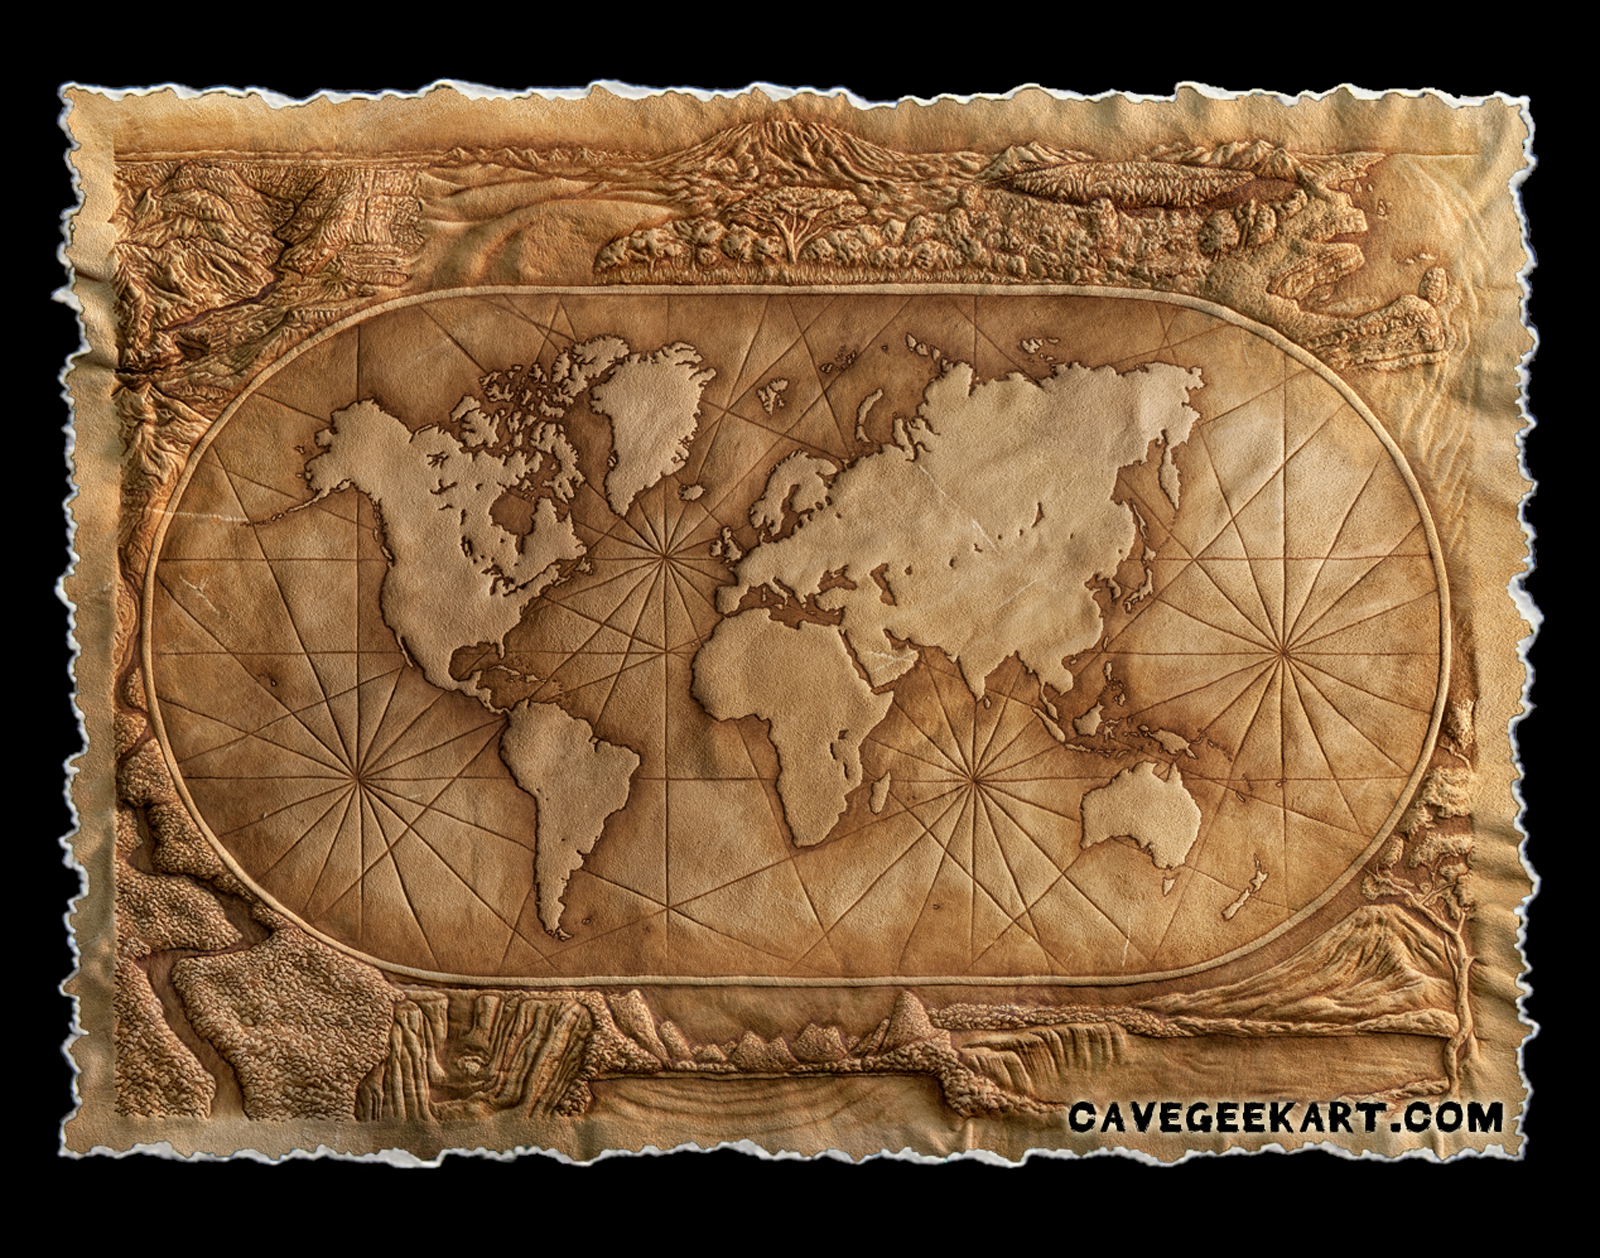 Earth’s Natural Wonders World Map Reproduction